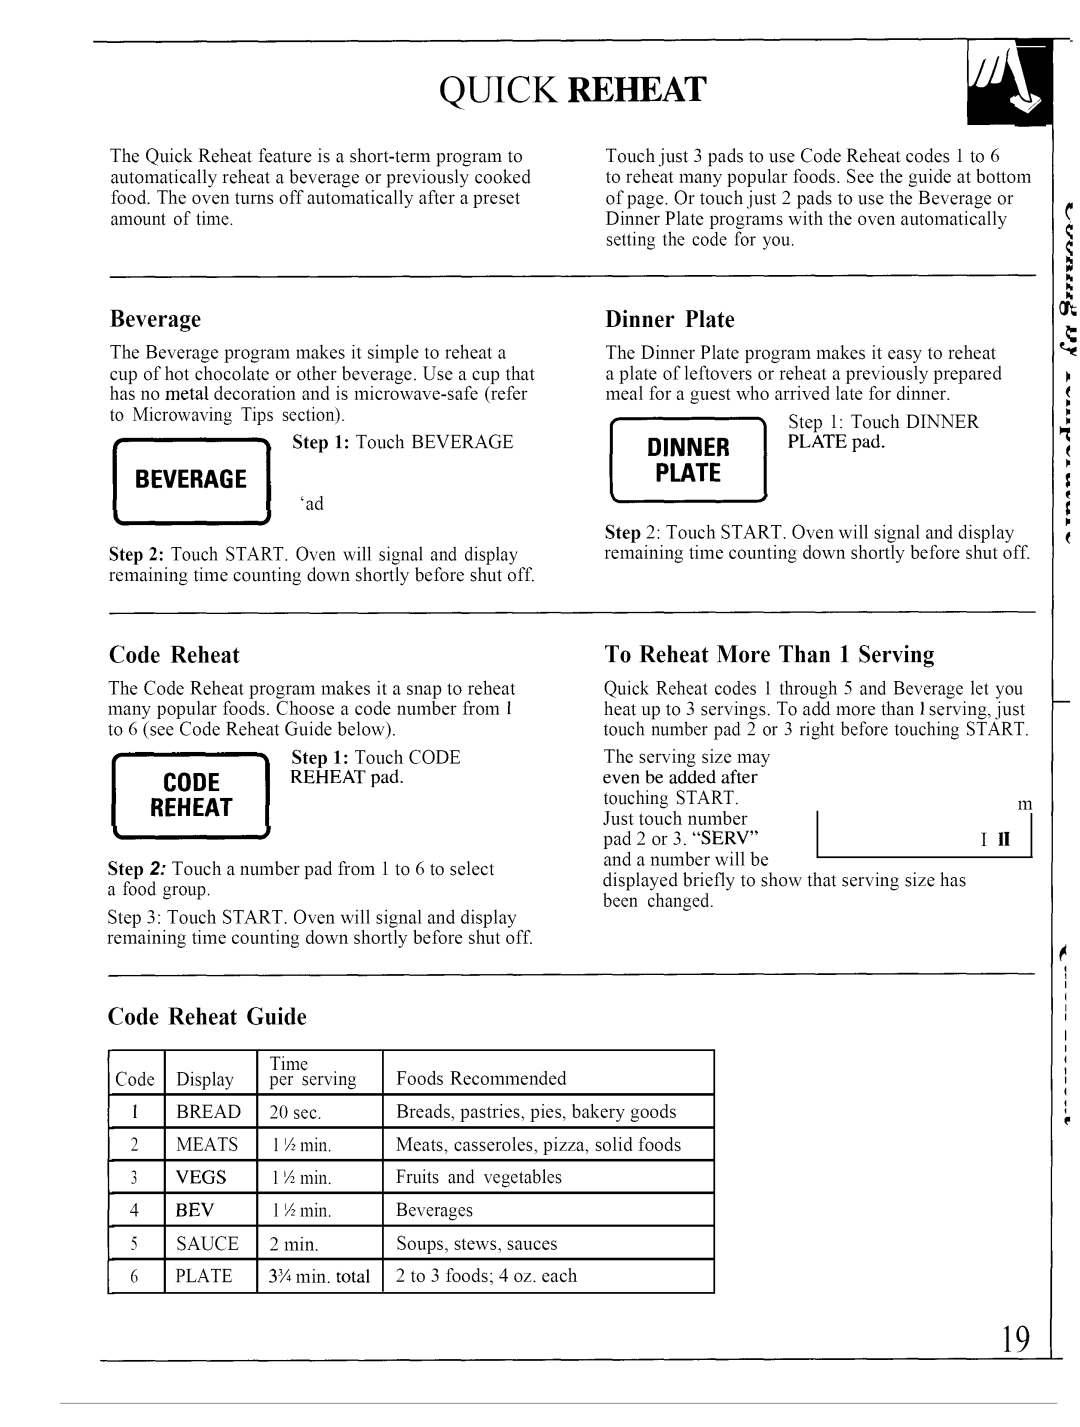 GE JVM140K operating instructions Qui C K Reheat, Beverage, Plate, Reheat Code, Code Reheat, Guide, Recommended 